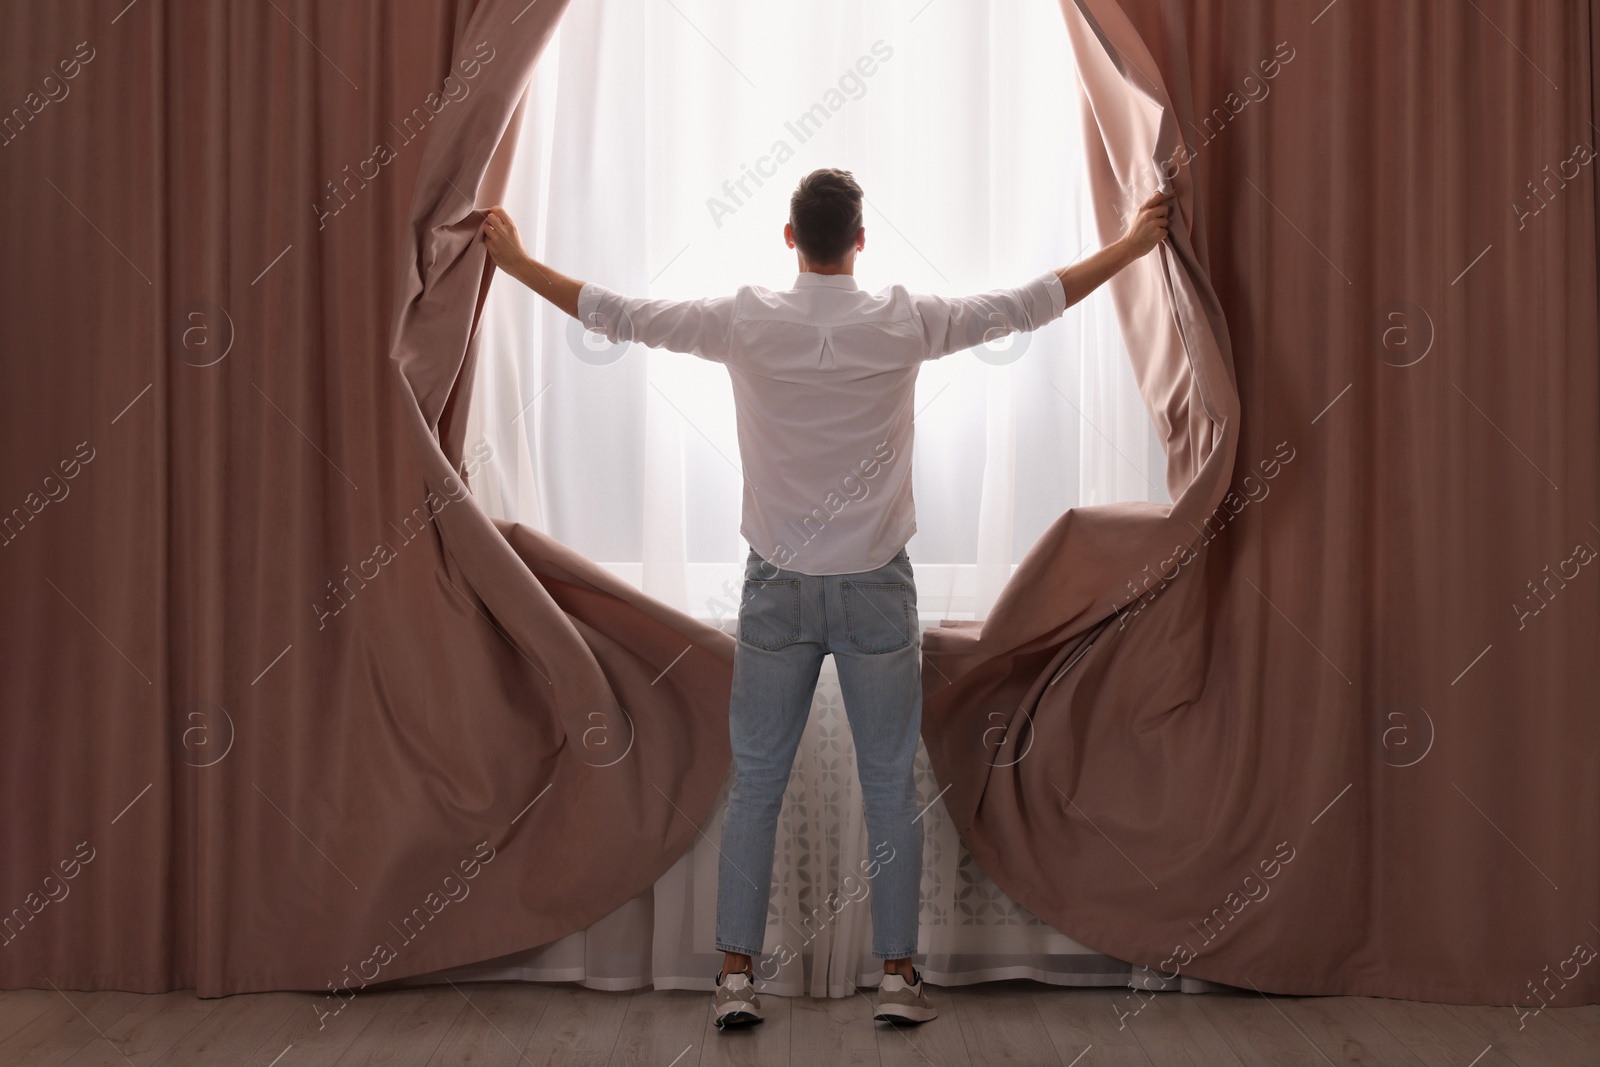 Photo of Man opening window curtains at home, back view